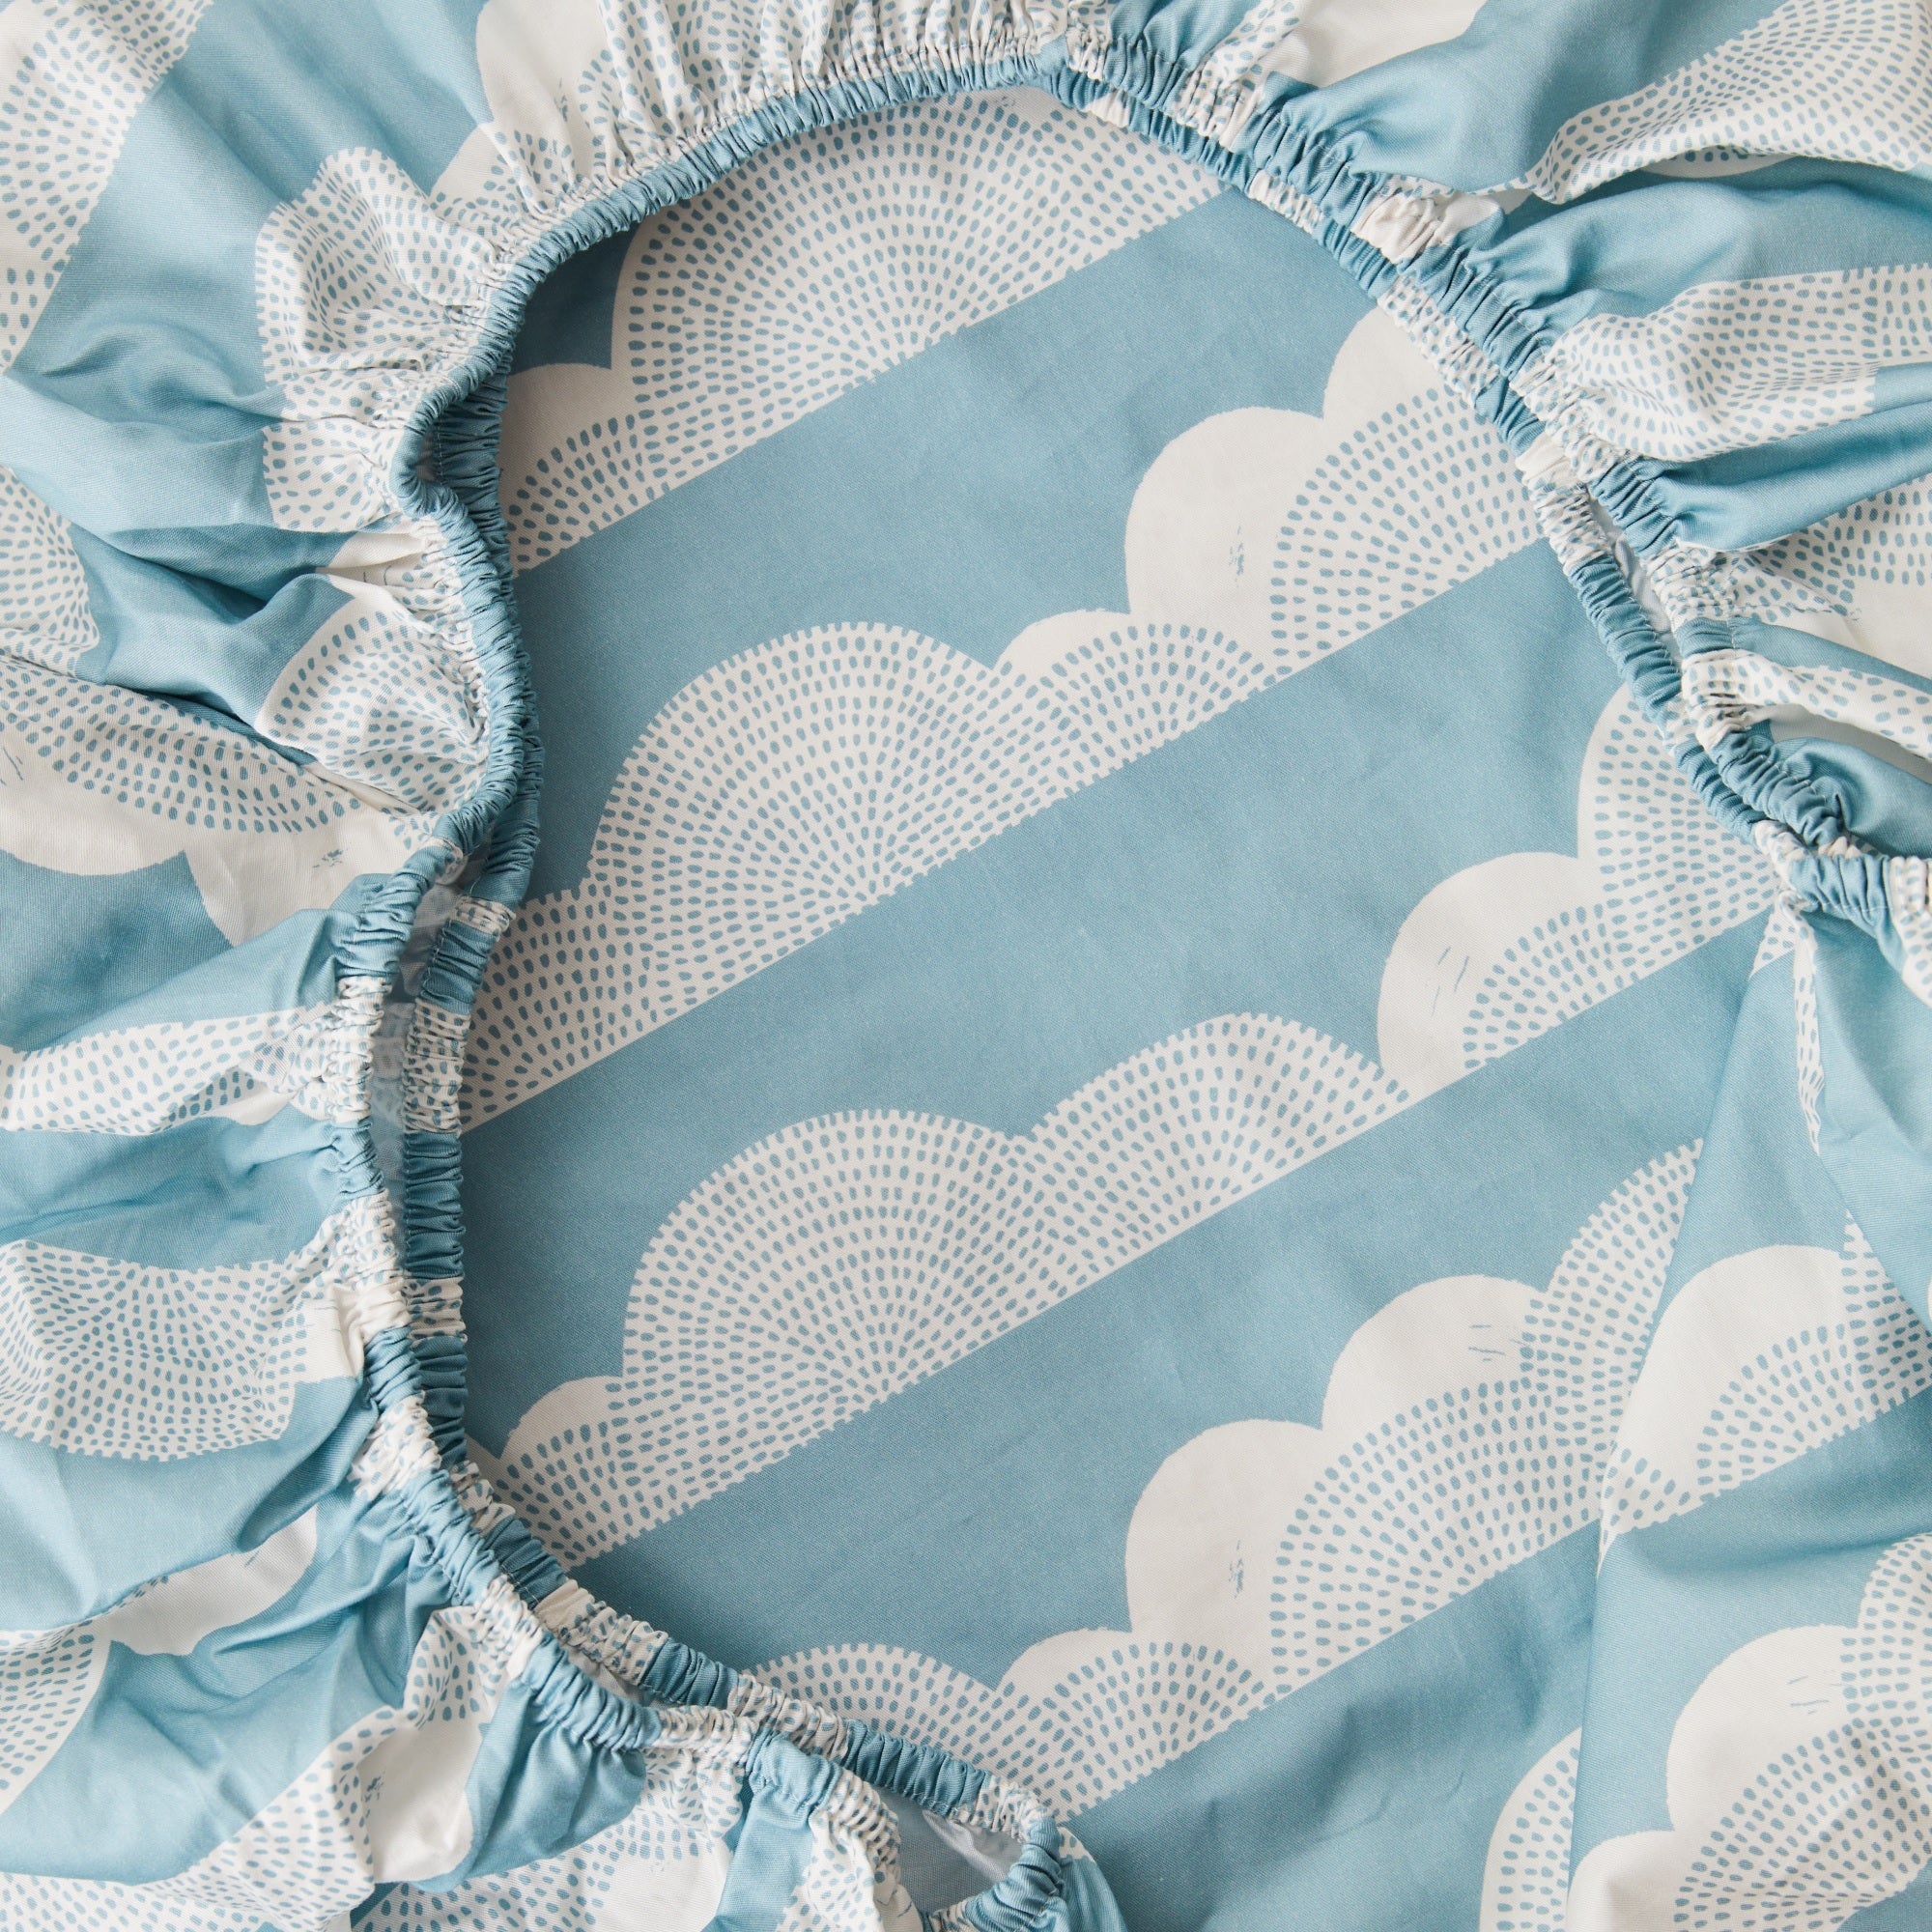 Rolling Cloud Organic Cotton Fitted Sheet